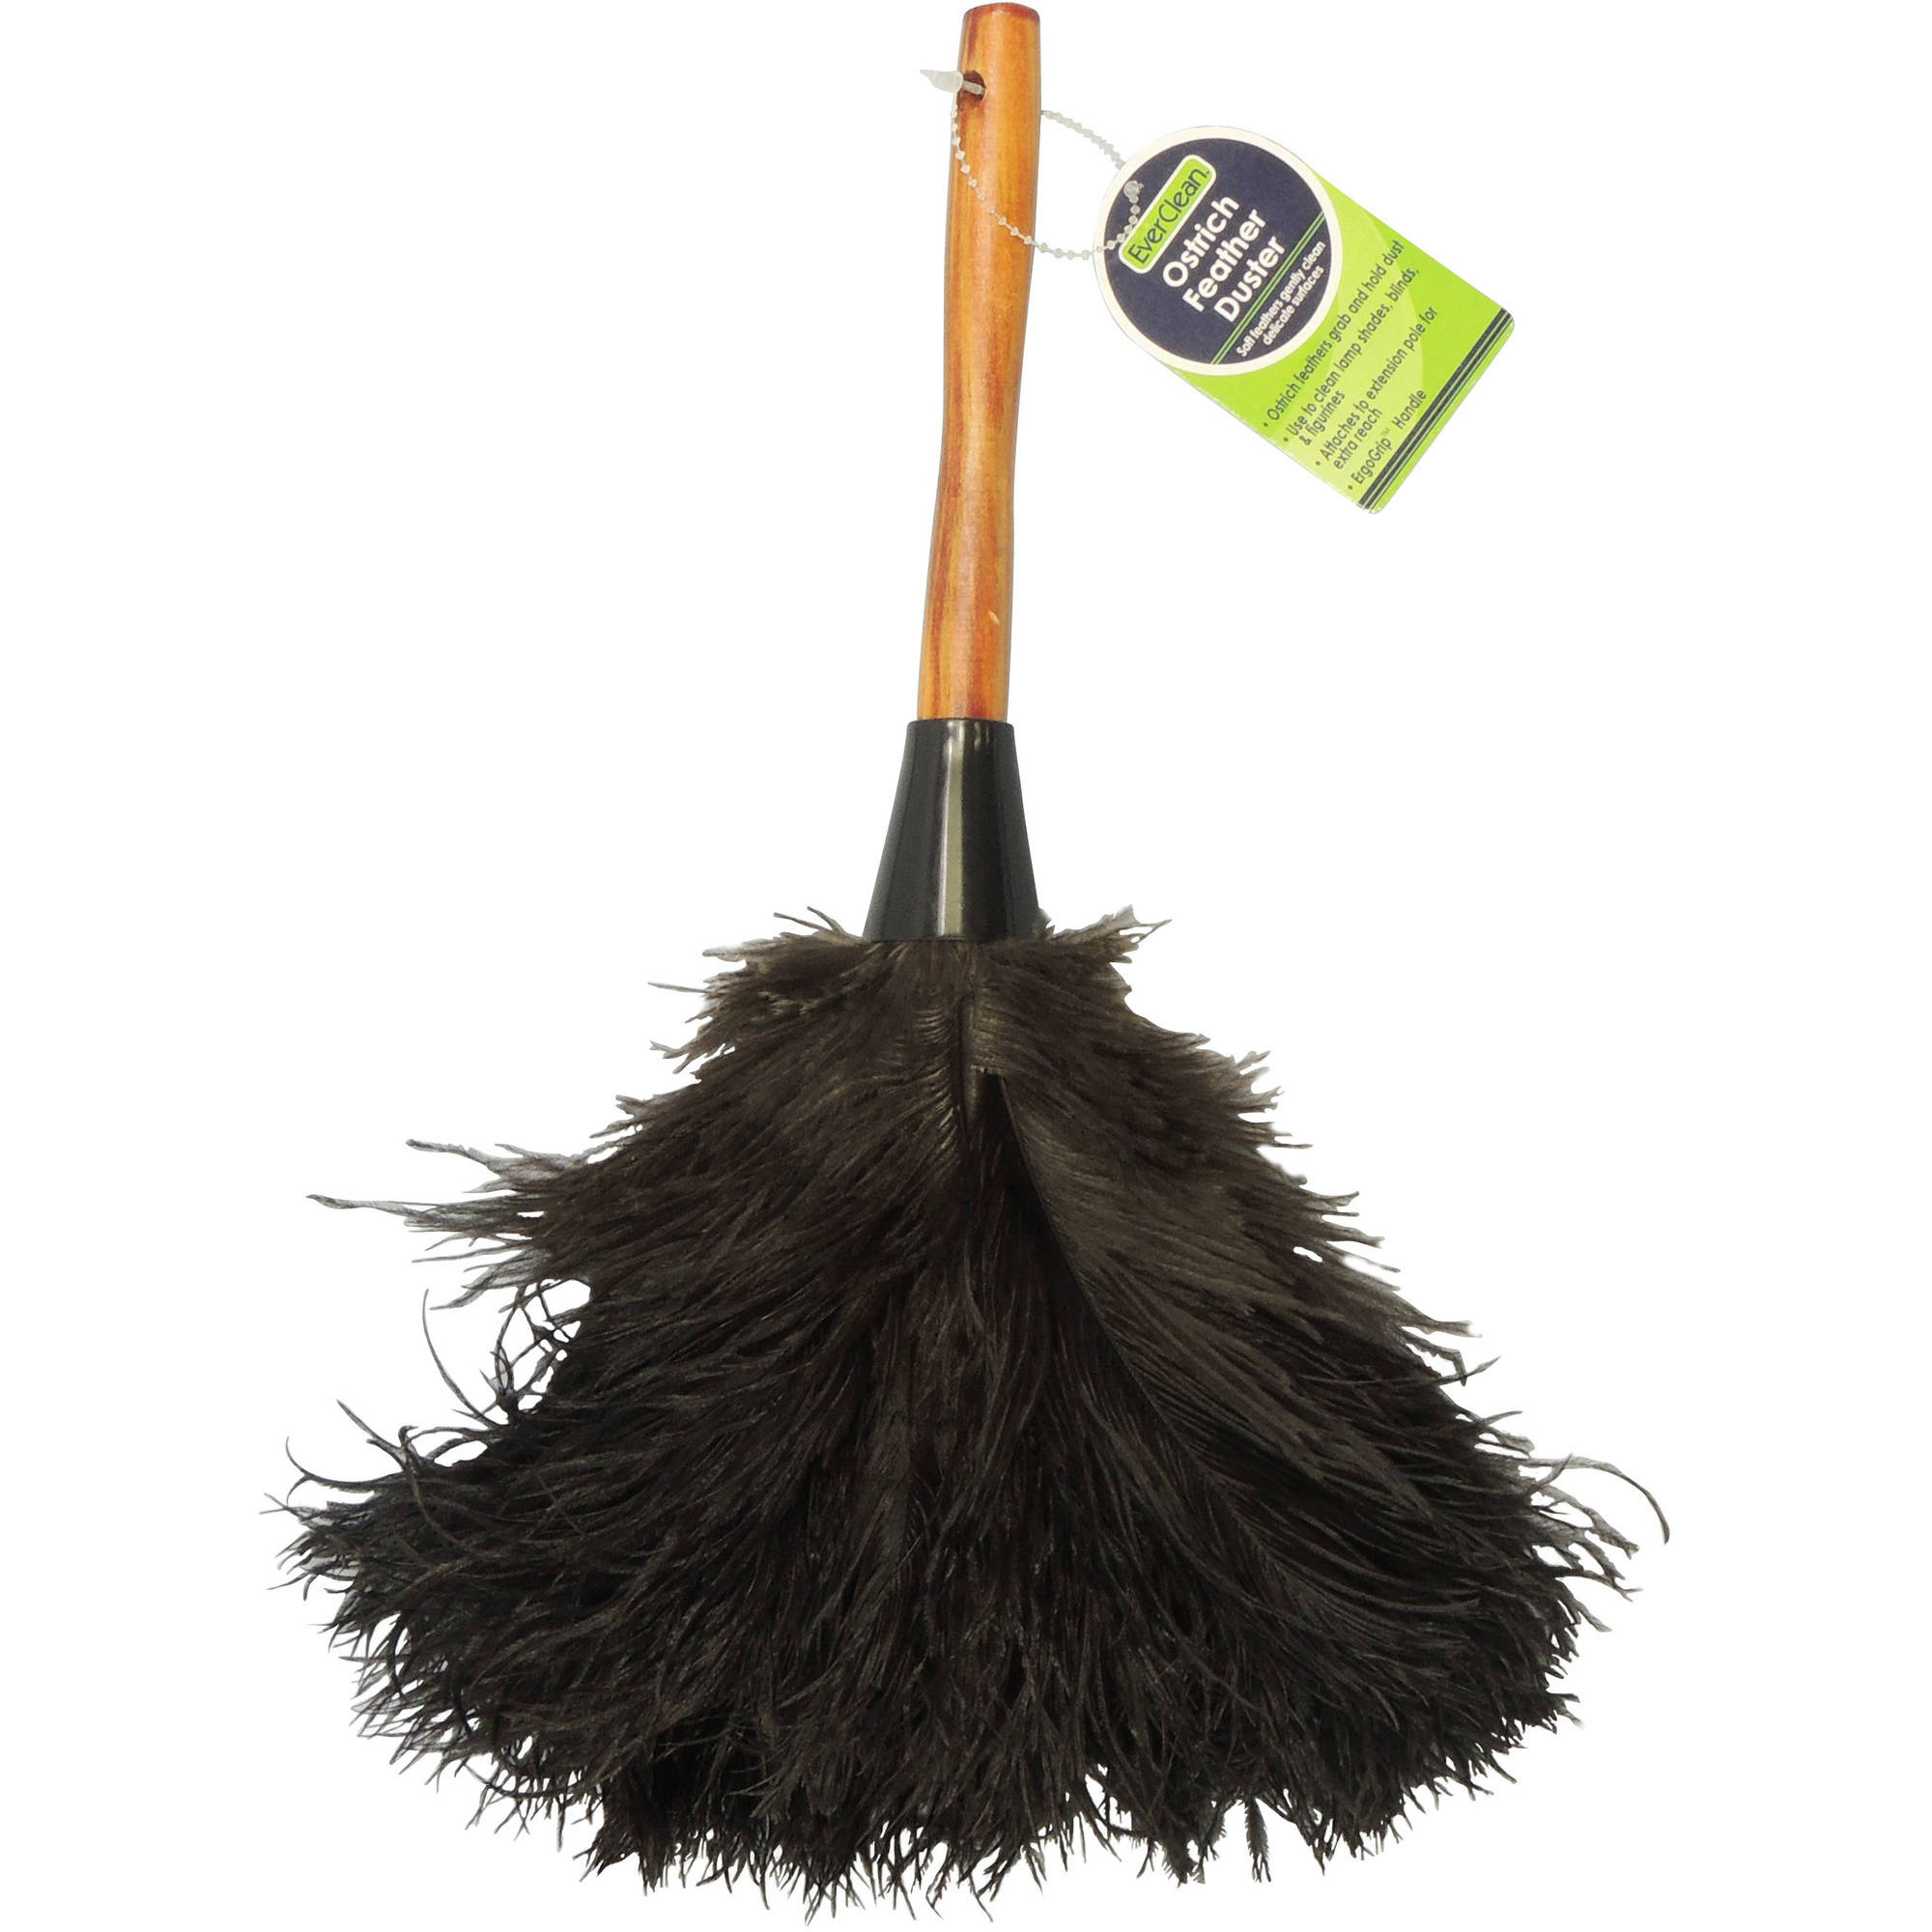 NOBRAND EverClean Ostrich Feather Duster - image 1 of 5